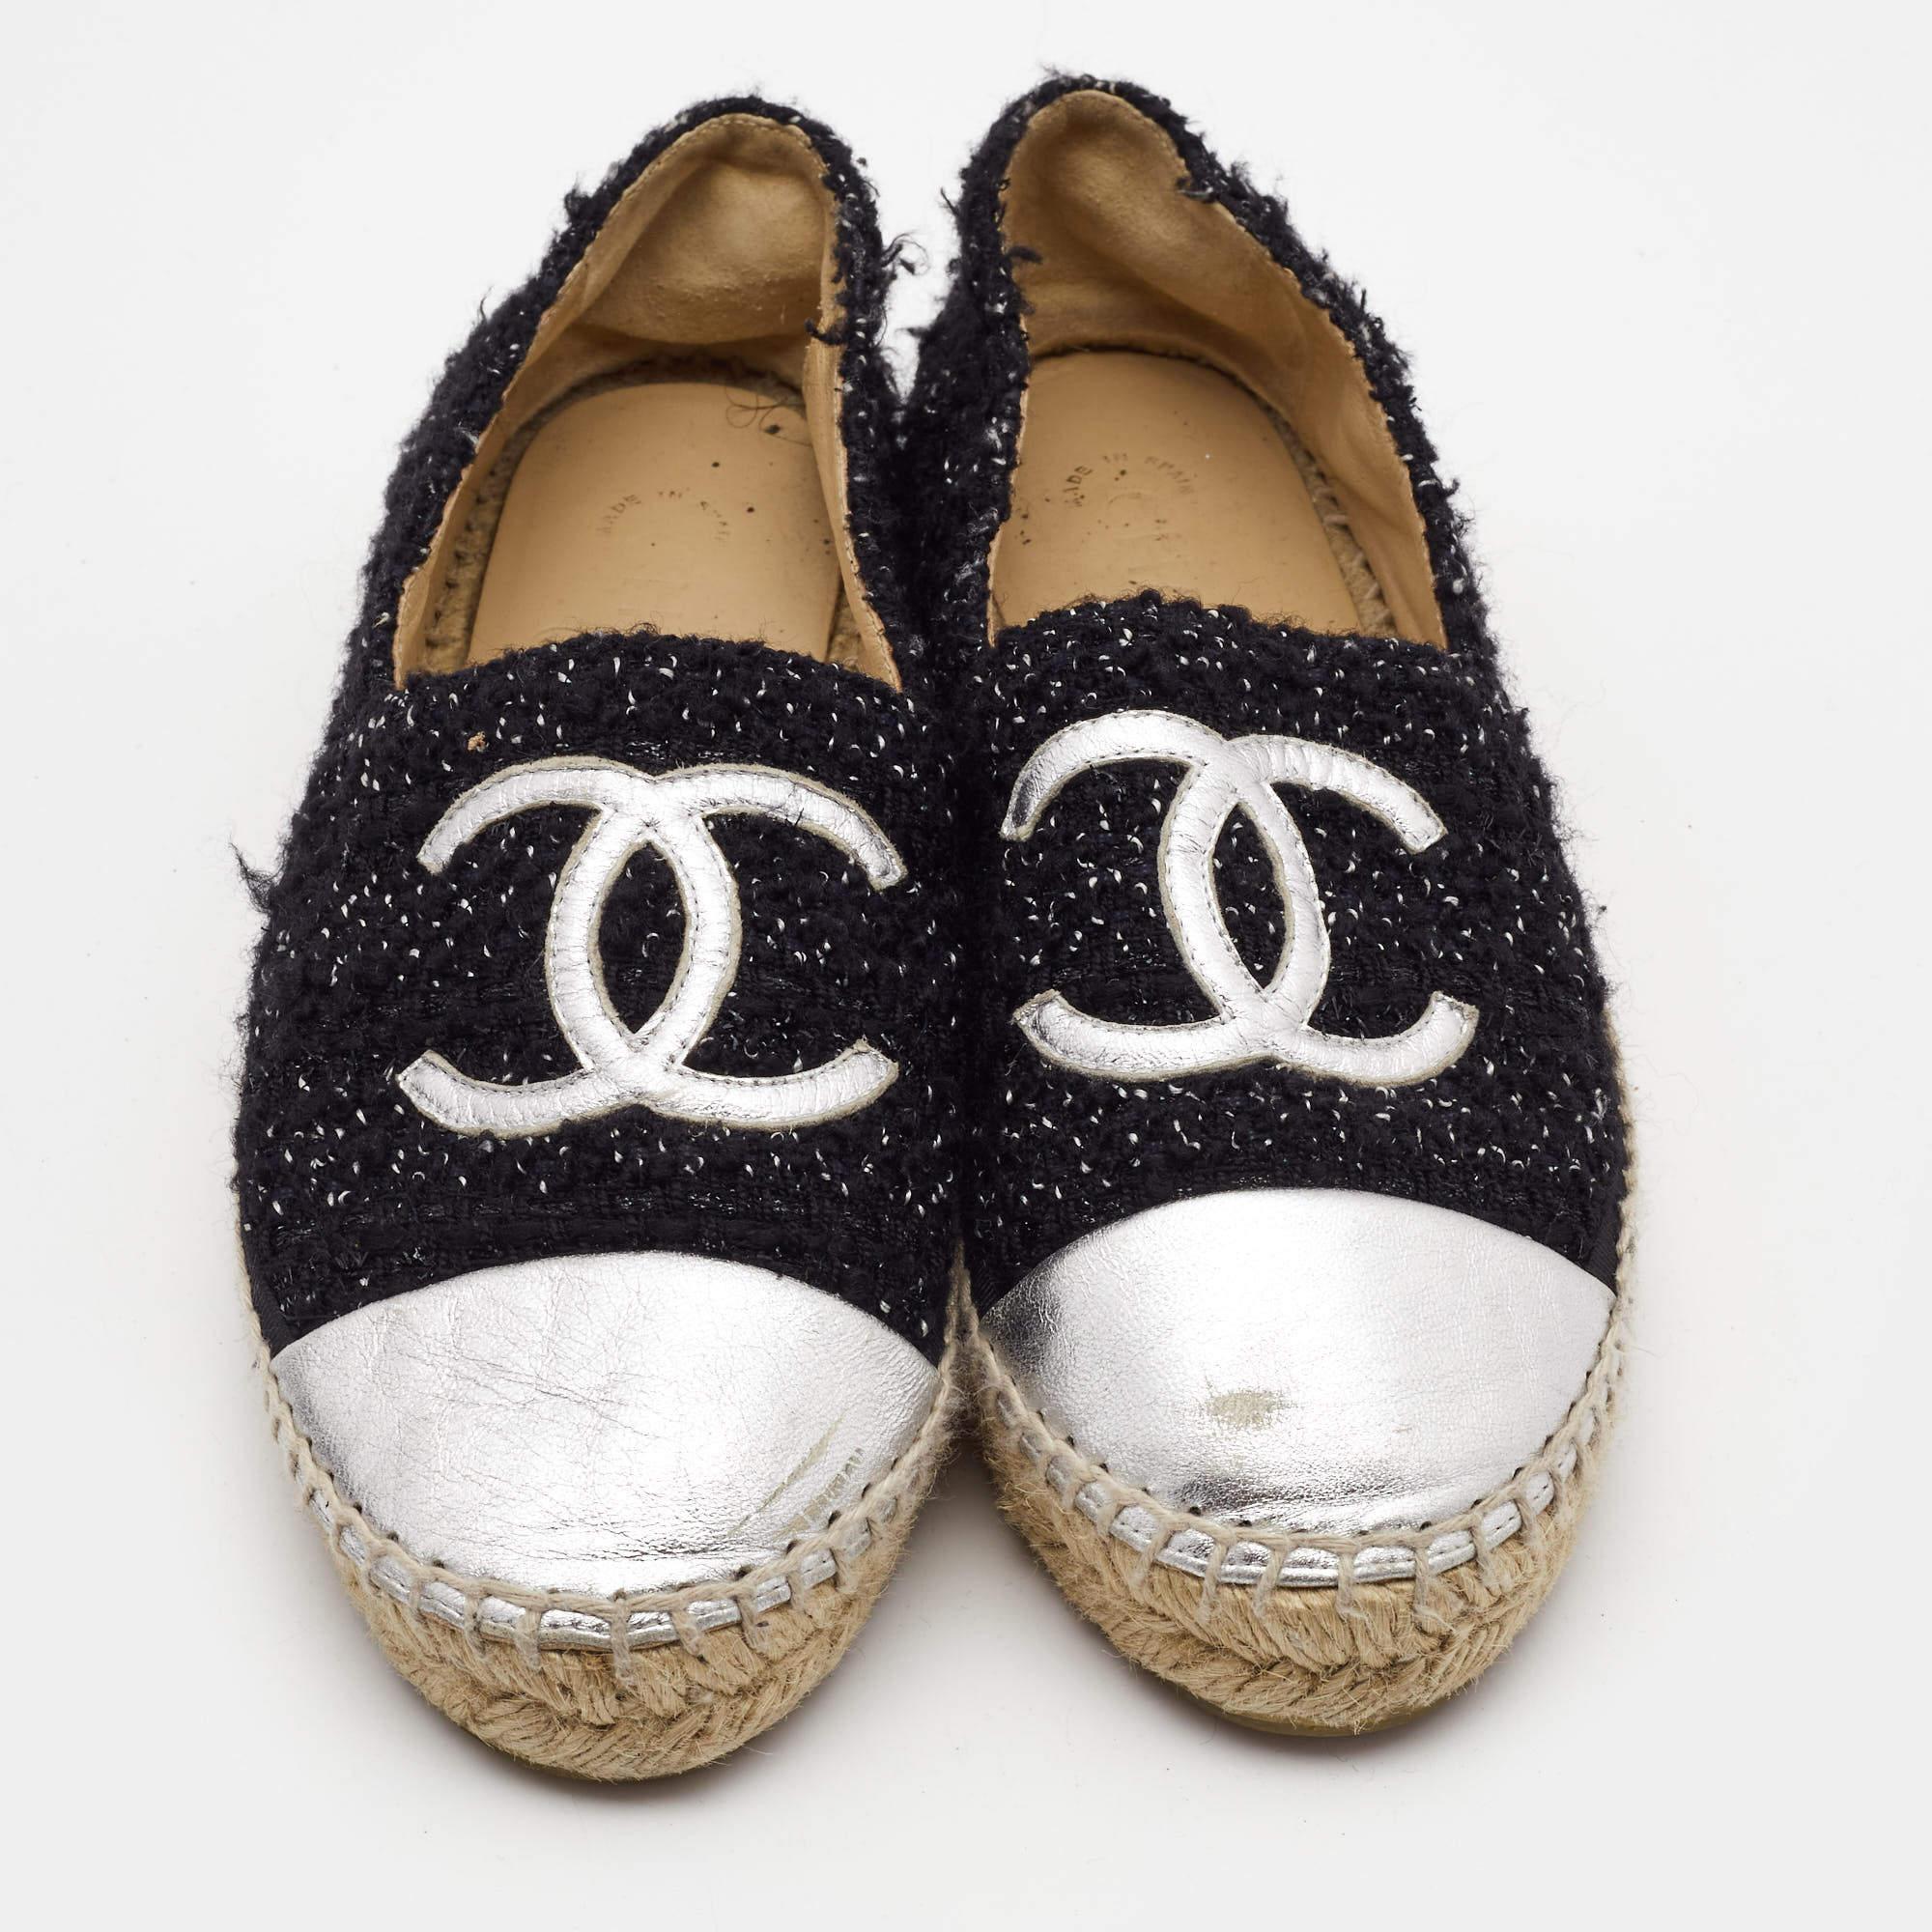 Chanel Black/Sliver Tweed and Leather CC Ballet Flats Size 39 In Good Condition For Sale In Dubai, Al Qouz 2